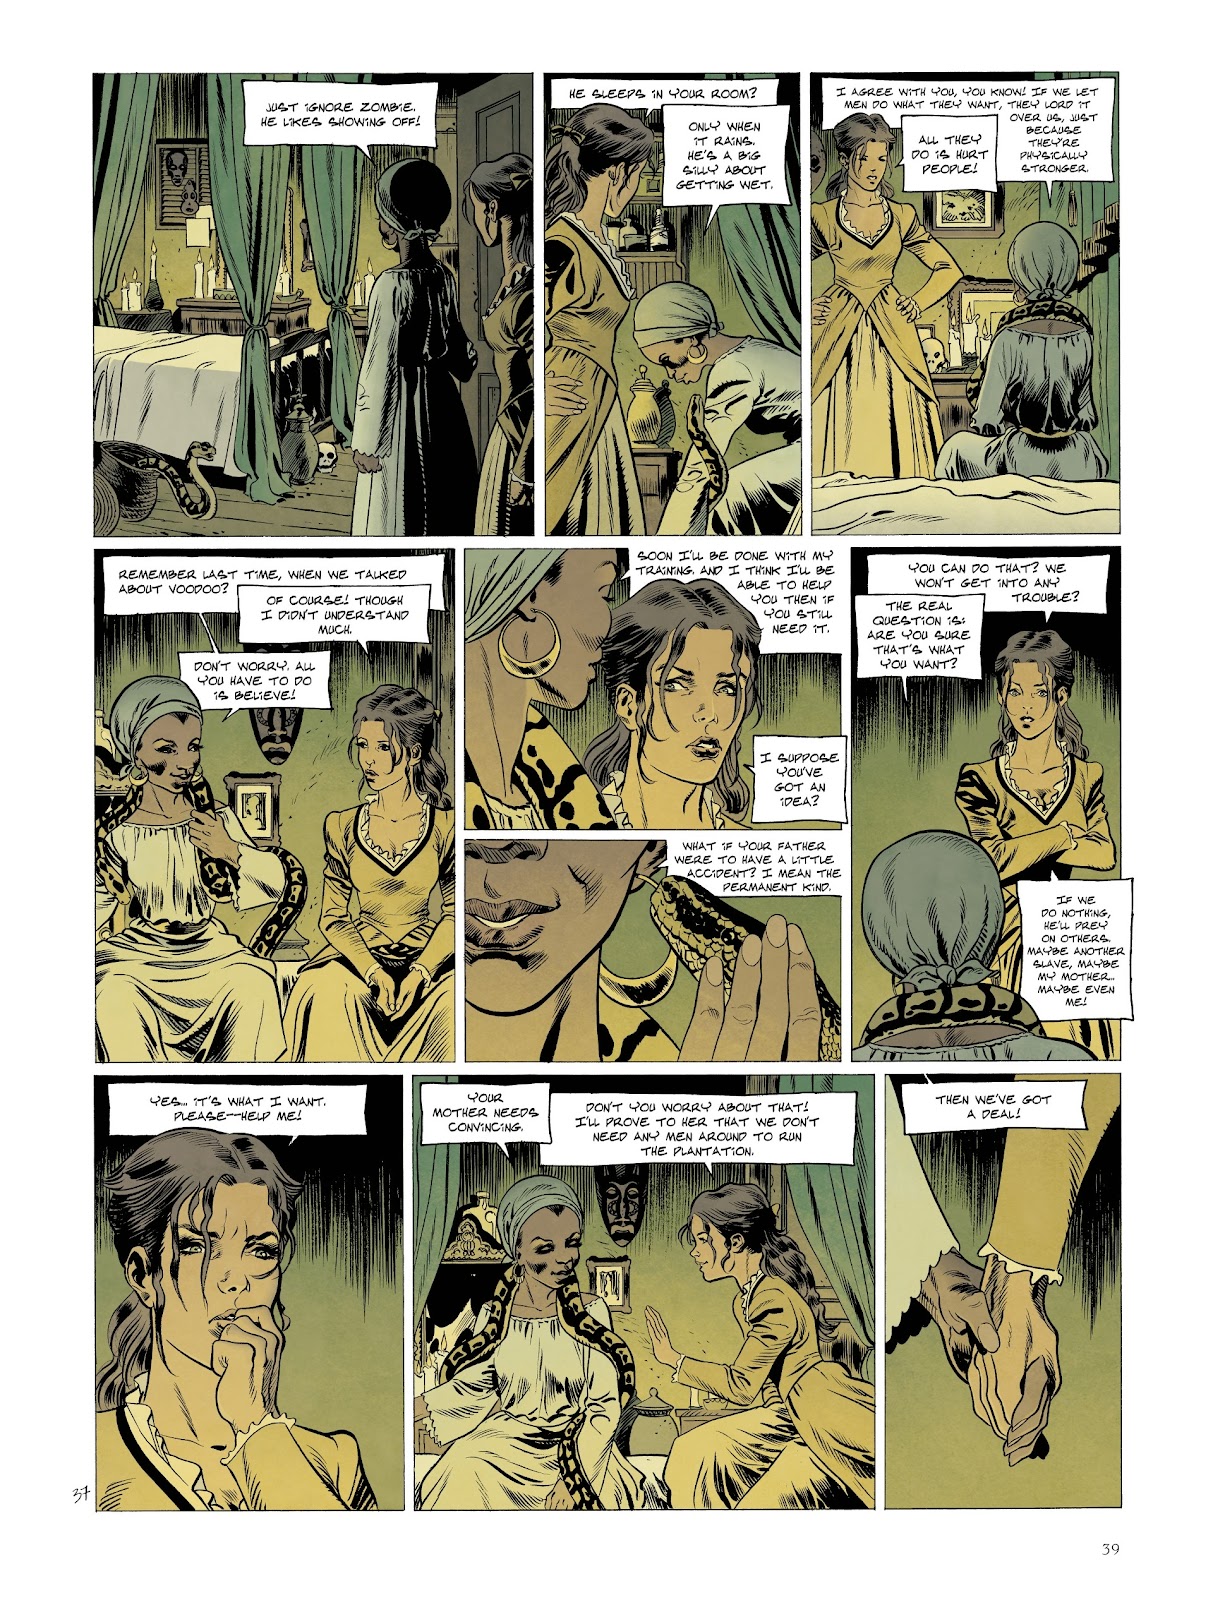 Louisiana: The Color of Blood issue 1 - Page 41